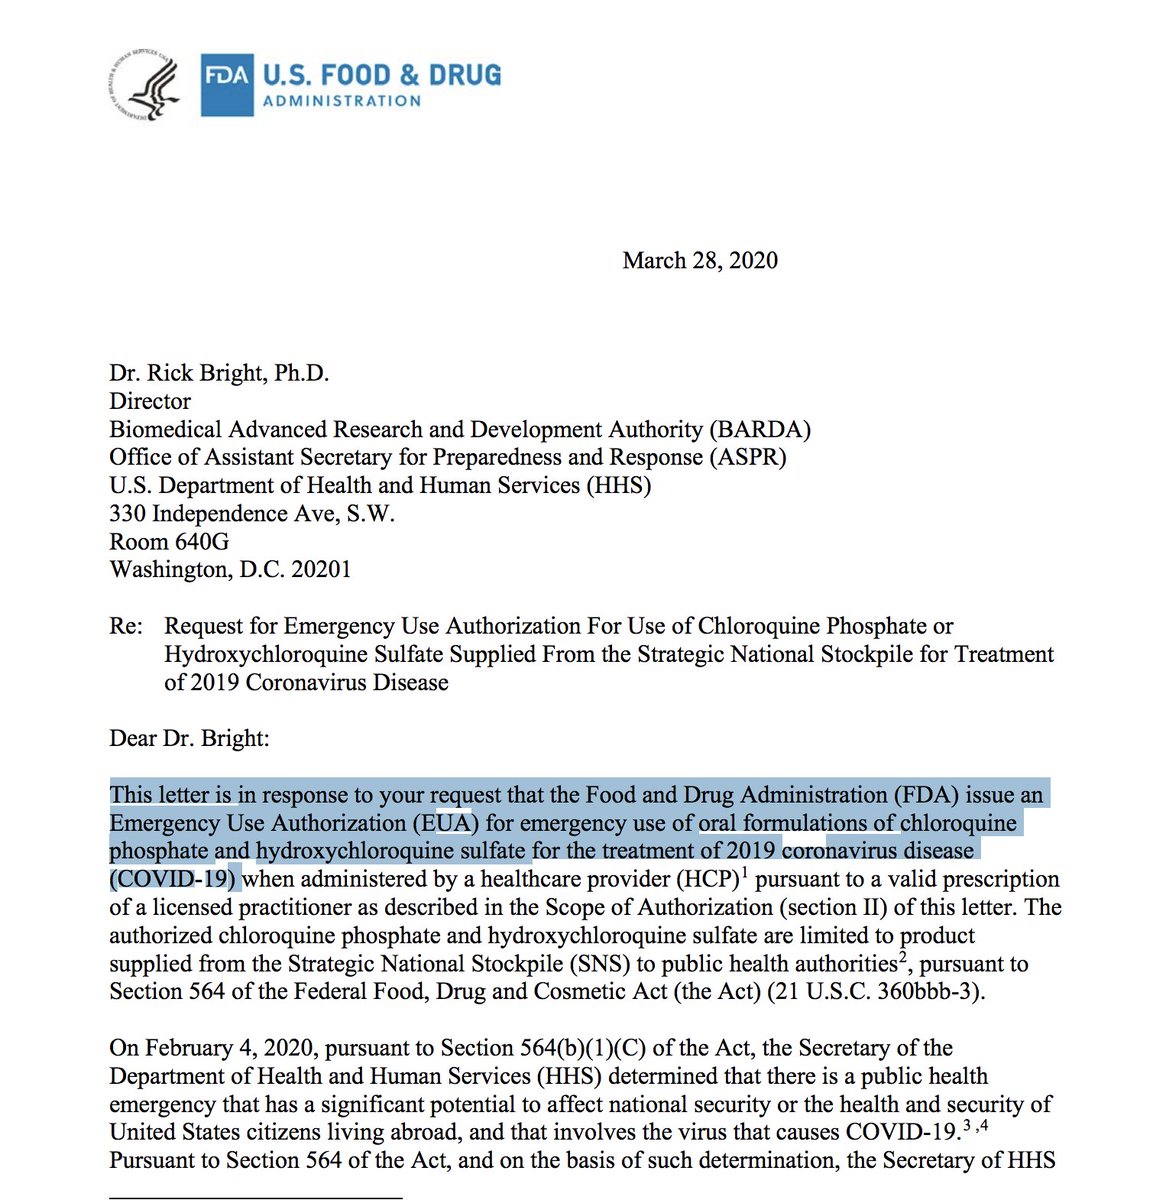 In March, Rick Bright requested the FDA issue an "Emergency Use Authorization (EUA) for emergency use of oral formulations of chloroquine phosphate and hydroxychloroquine sulfate for the treatment of 2019 coronavirus disease (COVID-19)..."  https://www.fda.gov/media/136534/download